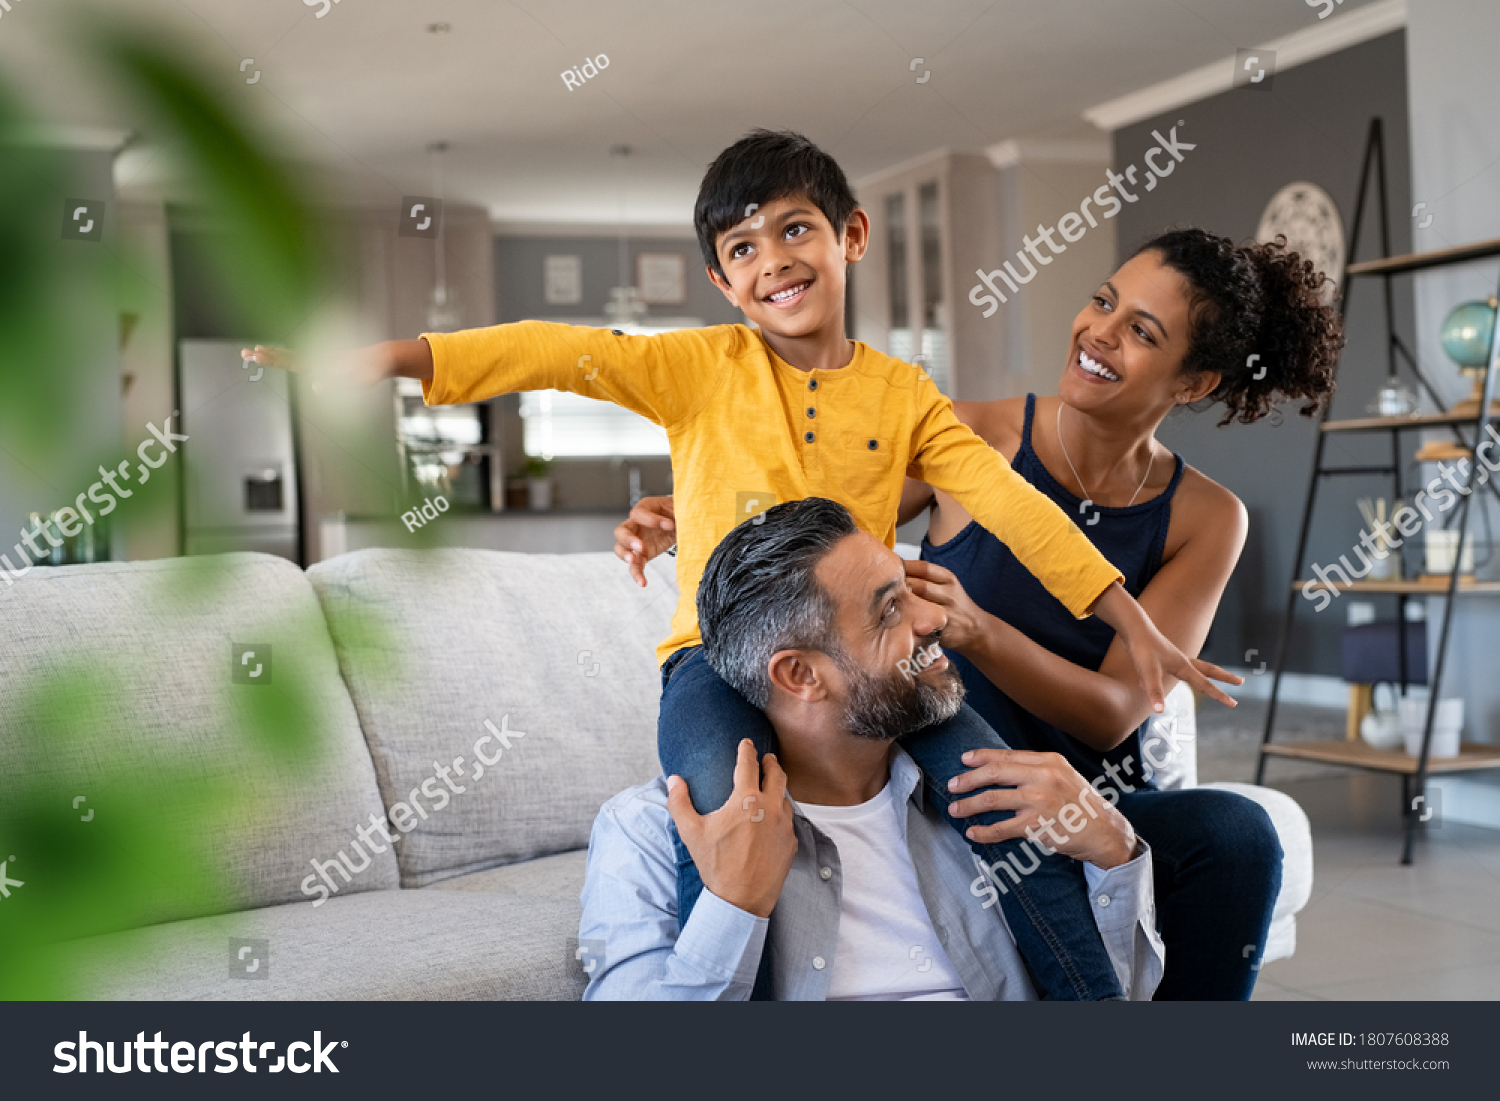 Cheerful indian son sitting on father shoulder playing at home with african mother. Playful little boy enjoying spending time with parents at home. Flying child enjoying playing with his ethnic family #1807608388